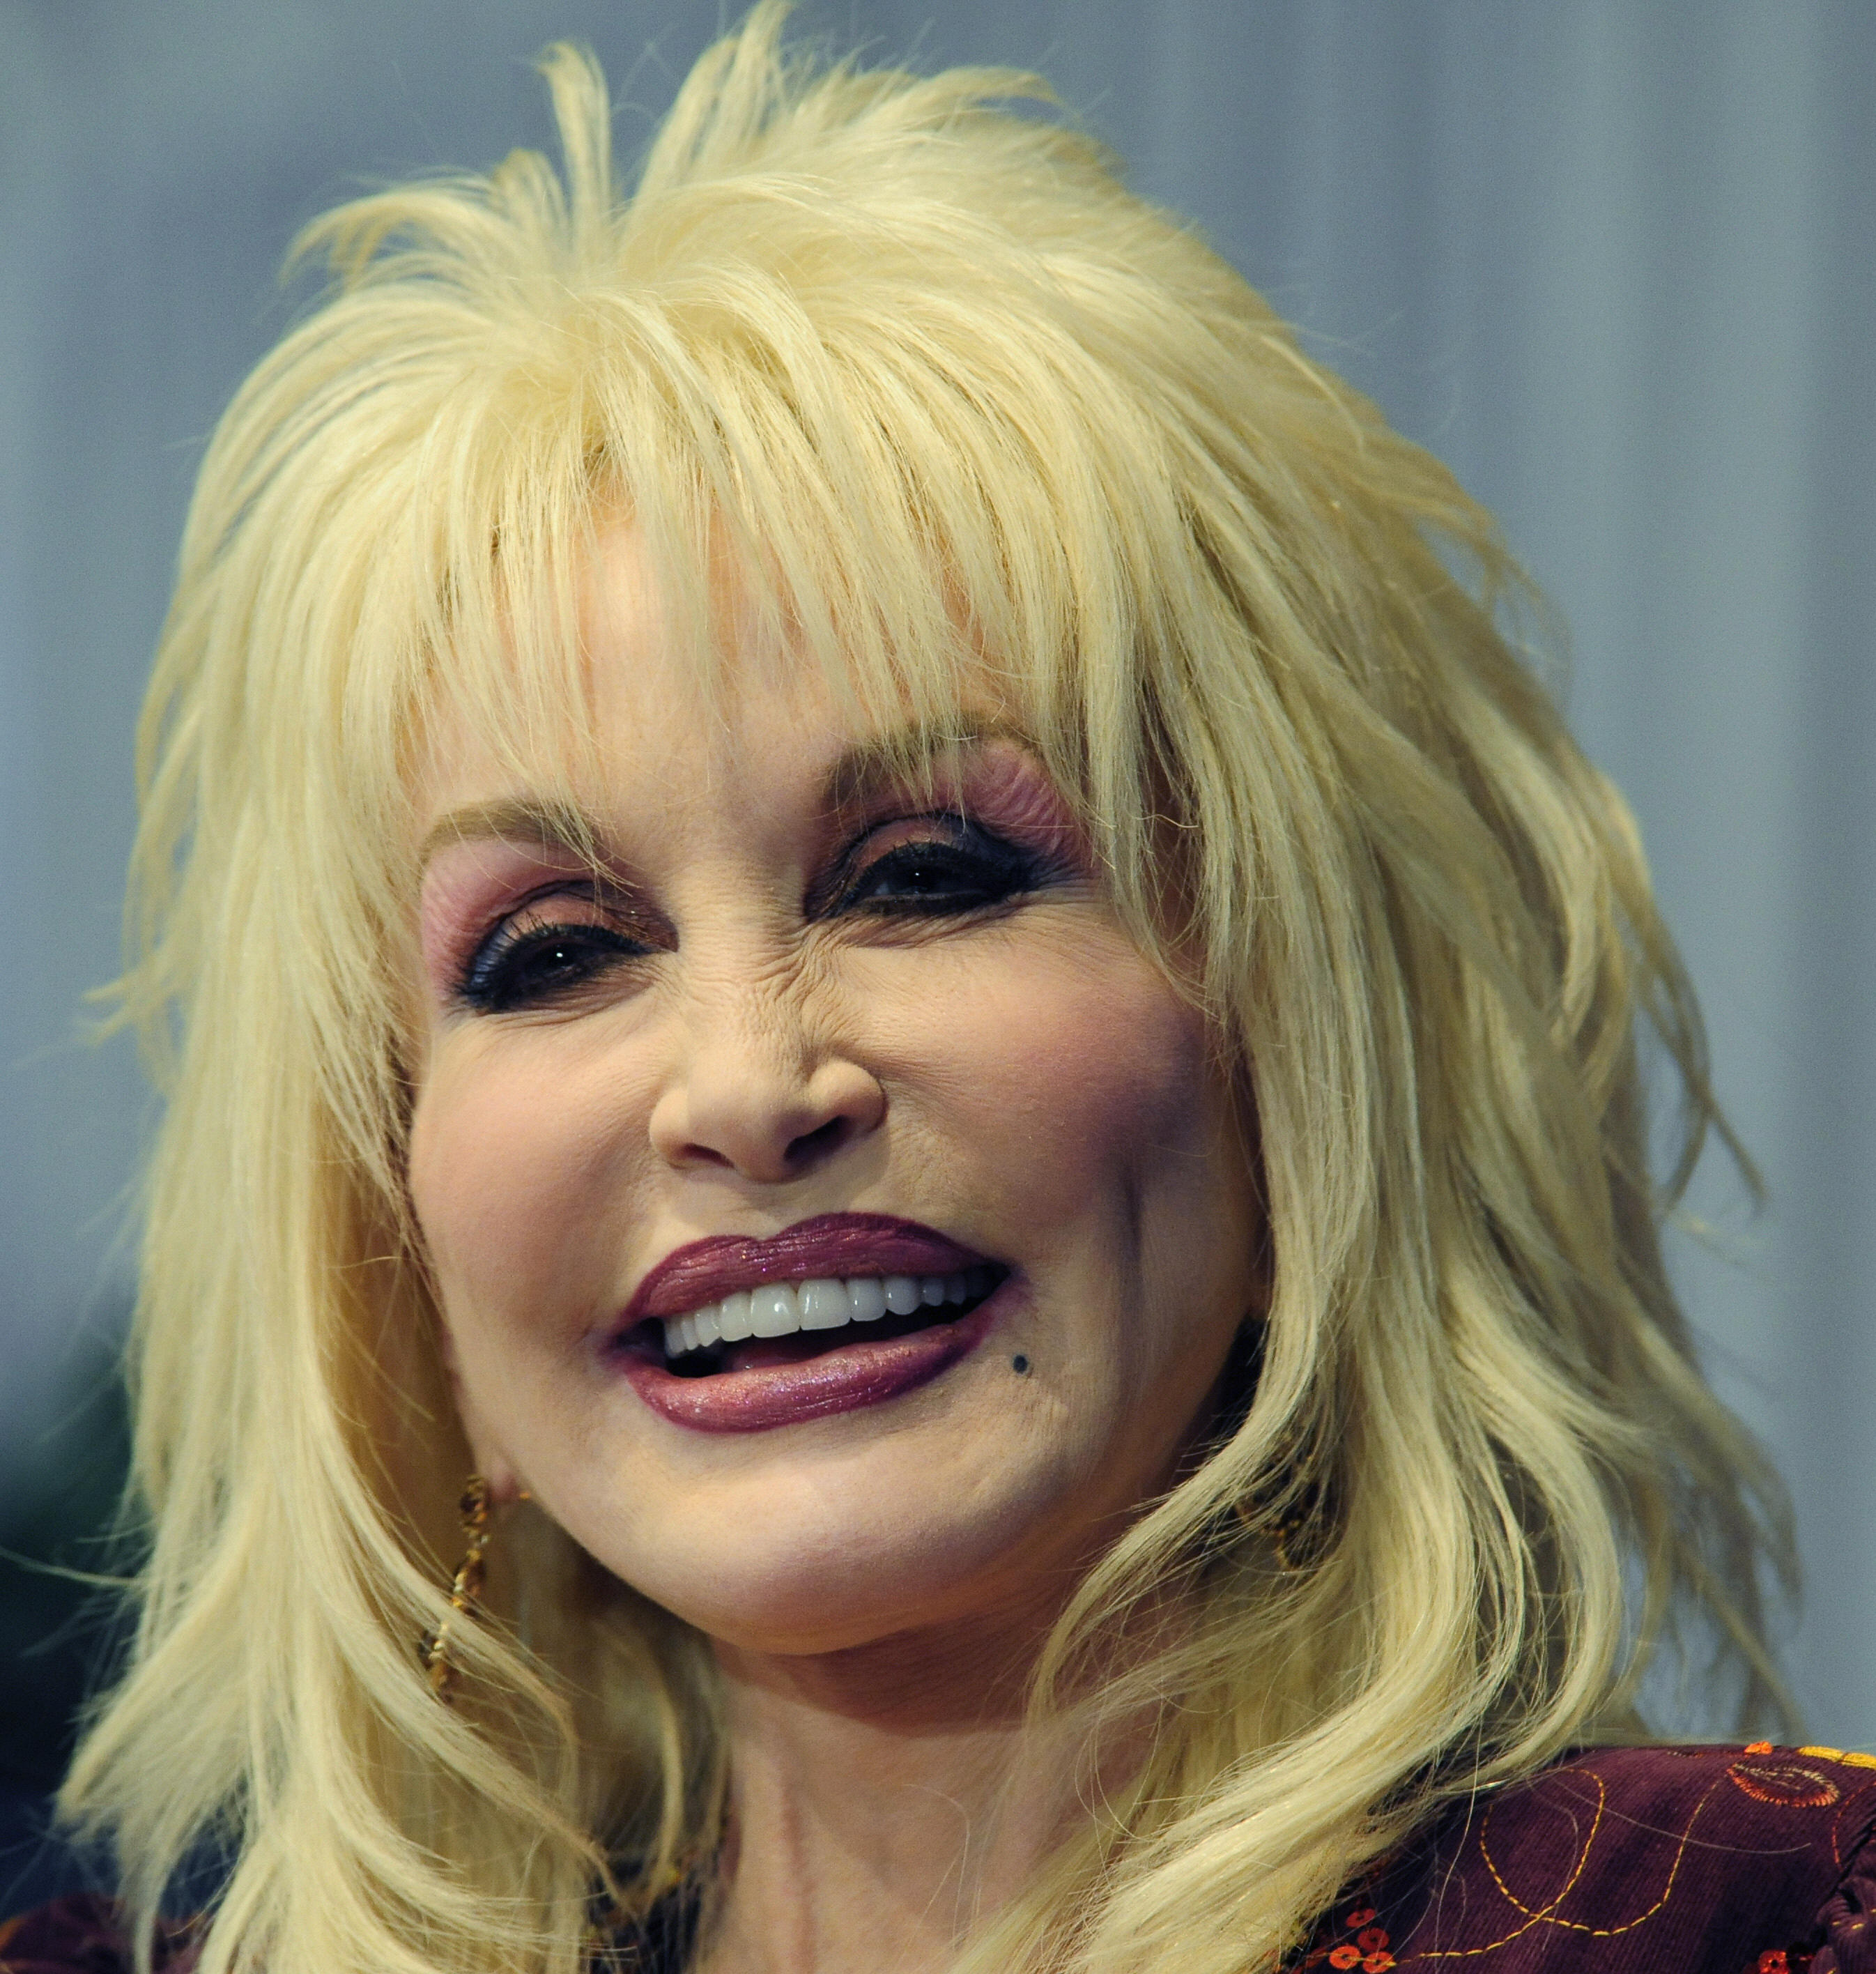 Dolly Parton addresses an audience at the National Press Club in Washington, DC on February 10, 2009 | Source: Getty Images